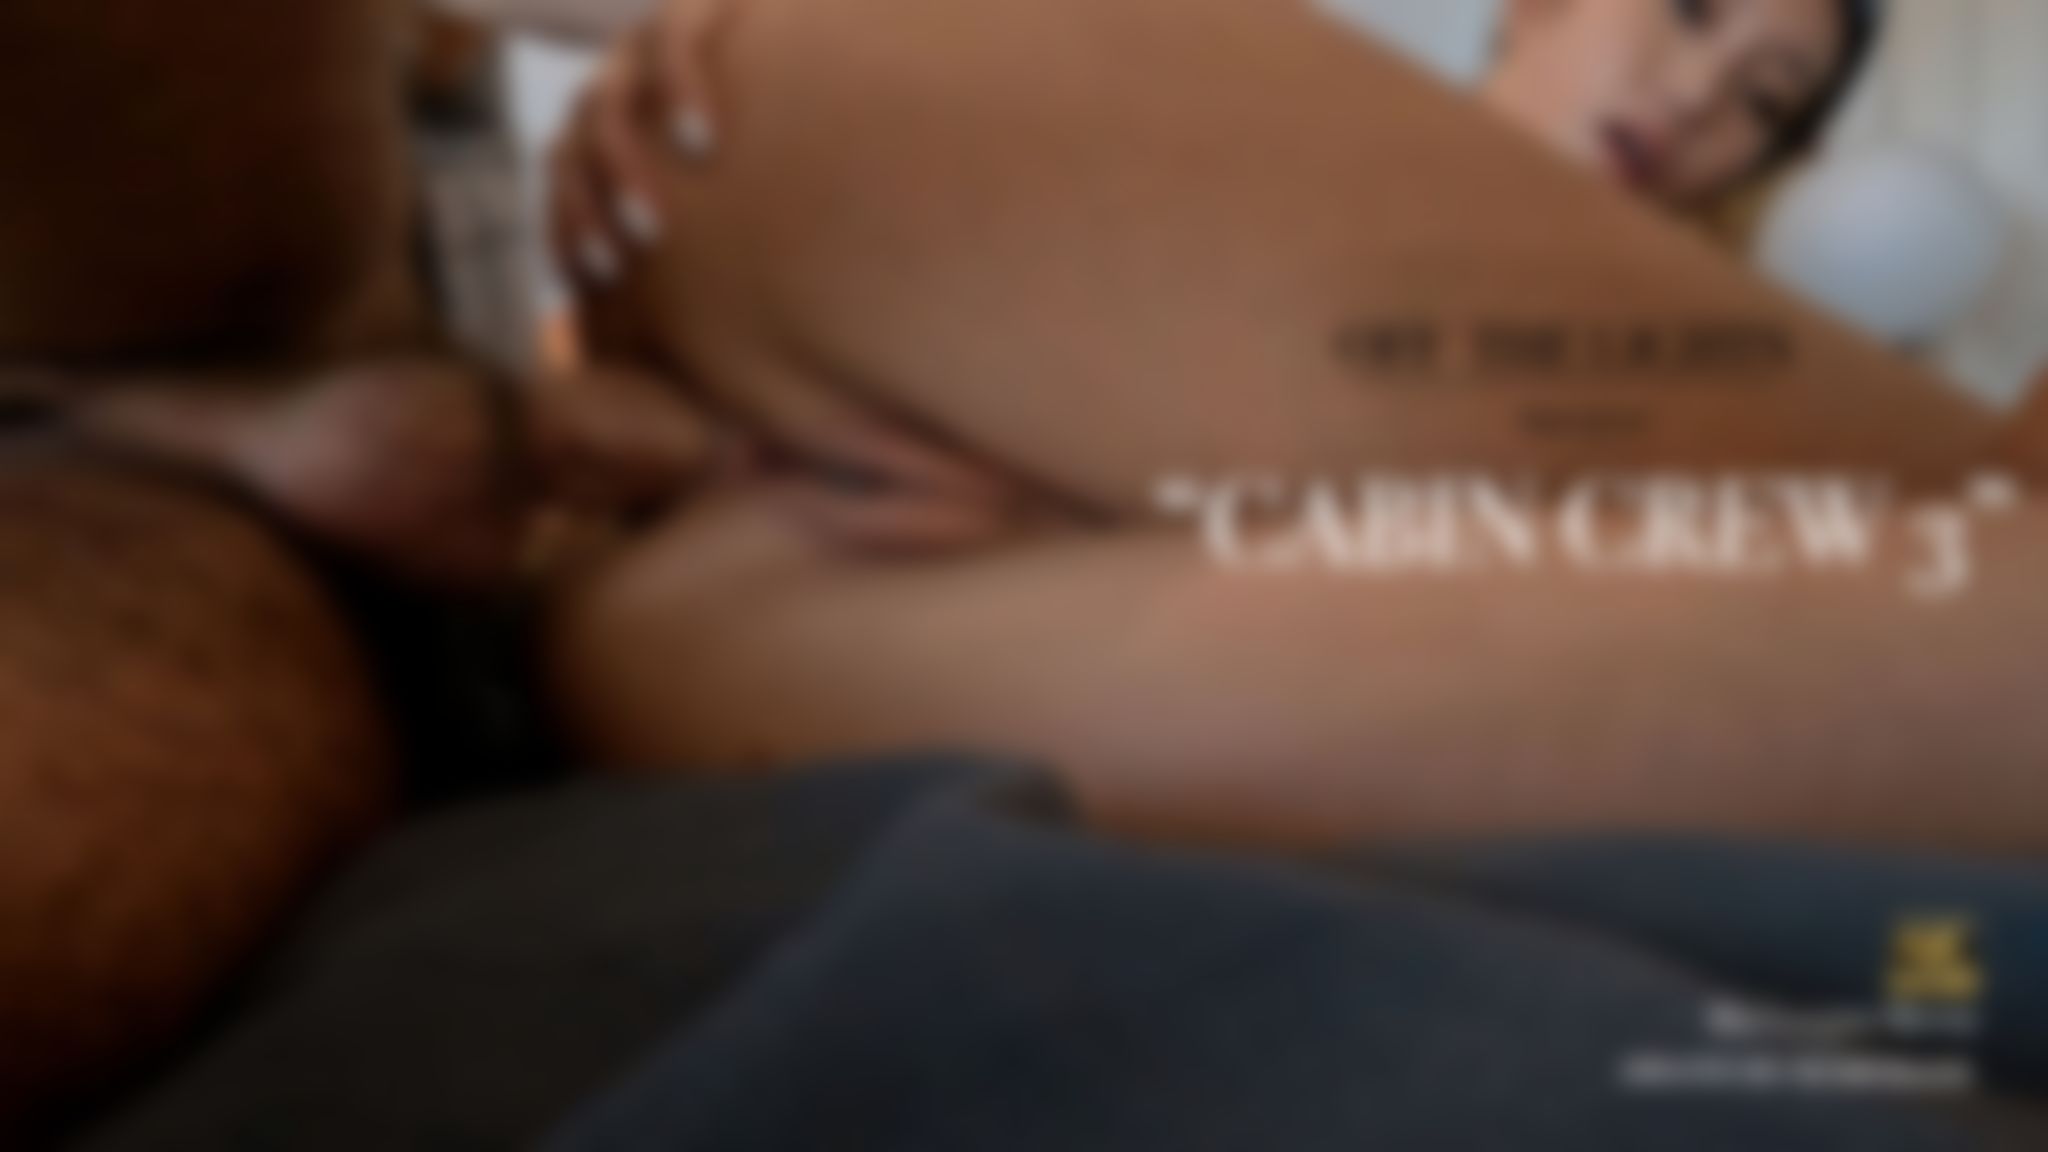 lonelymeow : LonelyMeow: “空姐”肛交高潮似水 Mia doing ANAL in "CABIN CREW“ vol.3